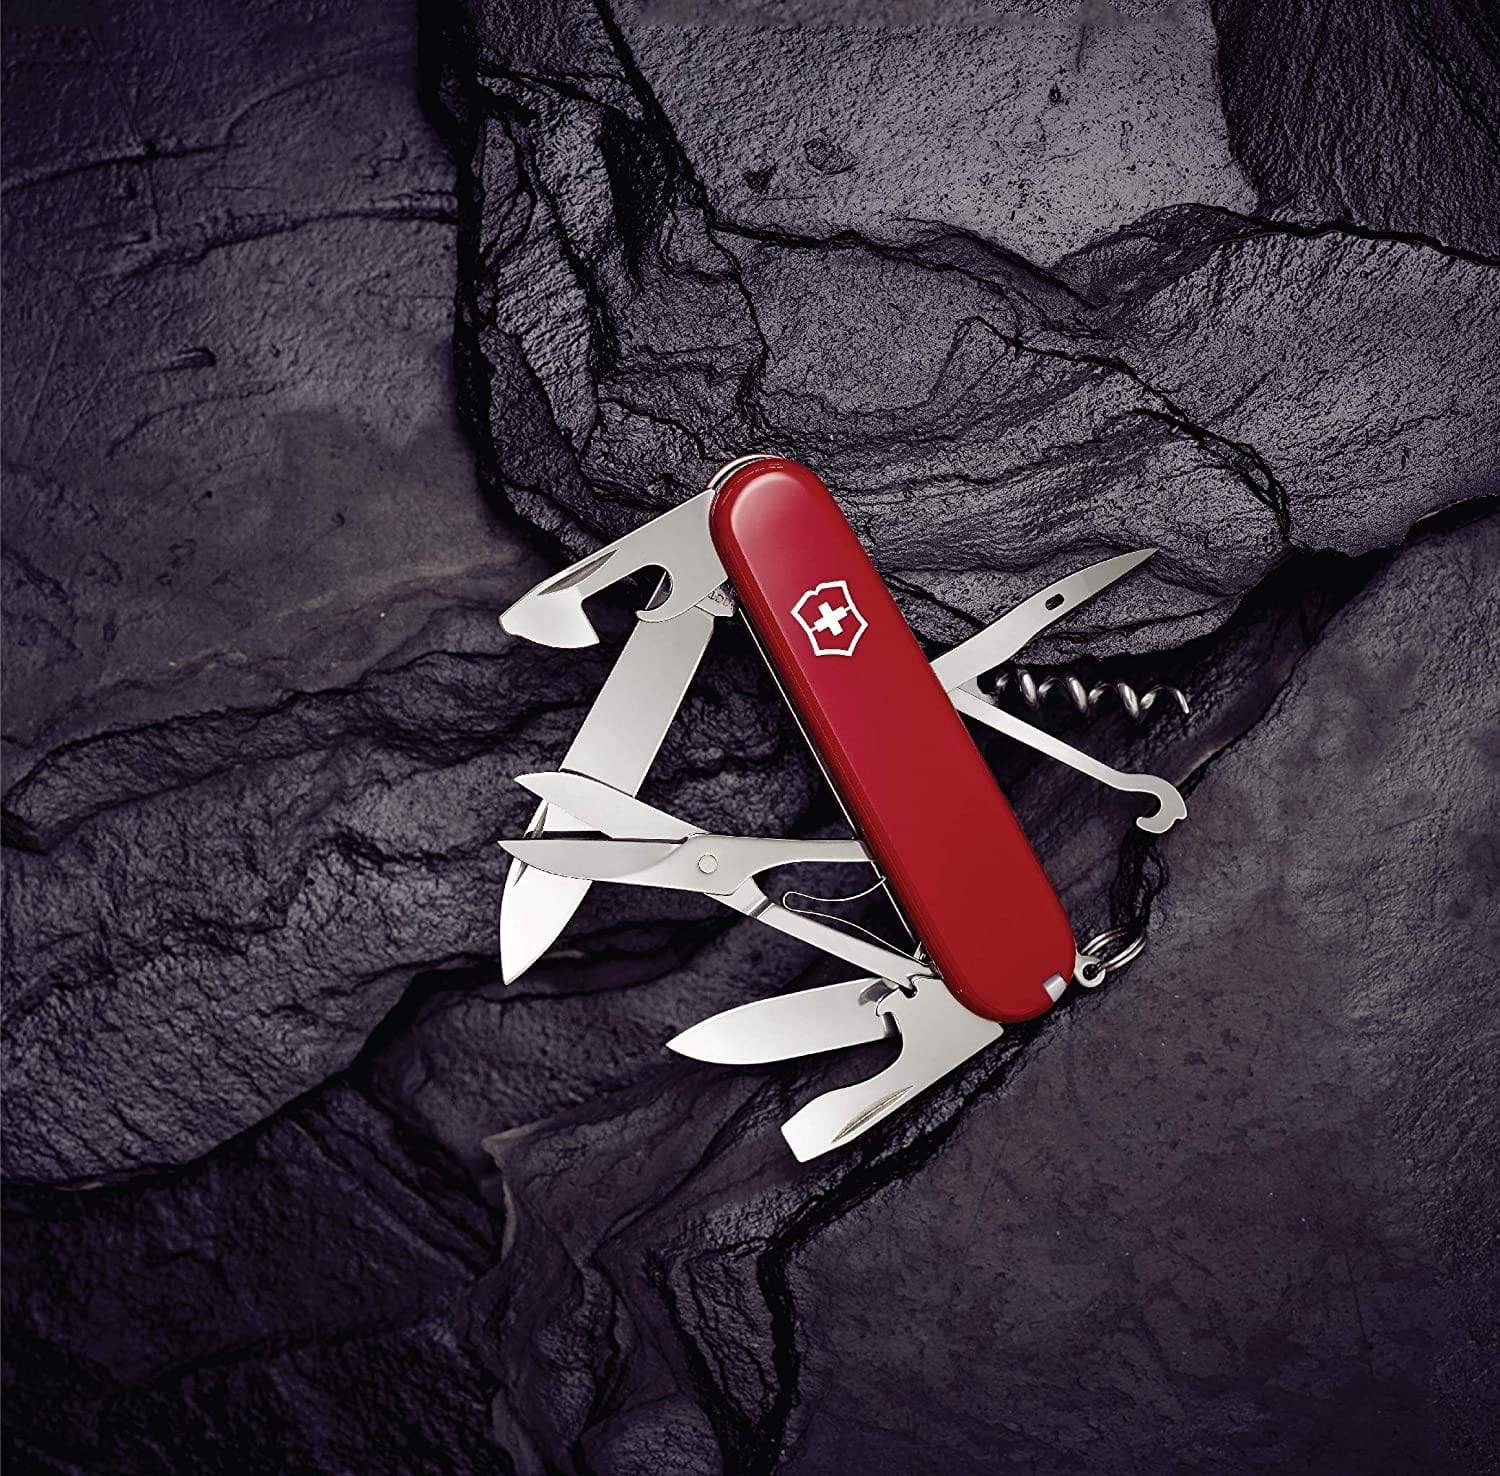 Victorinox Swiss Army Climber 91mm Red With 14 Functions - 1.3703/B1